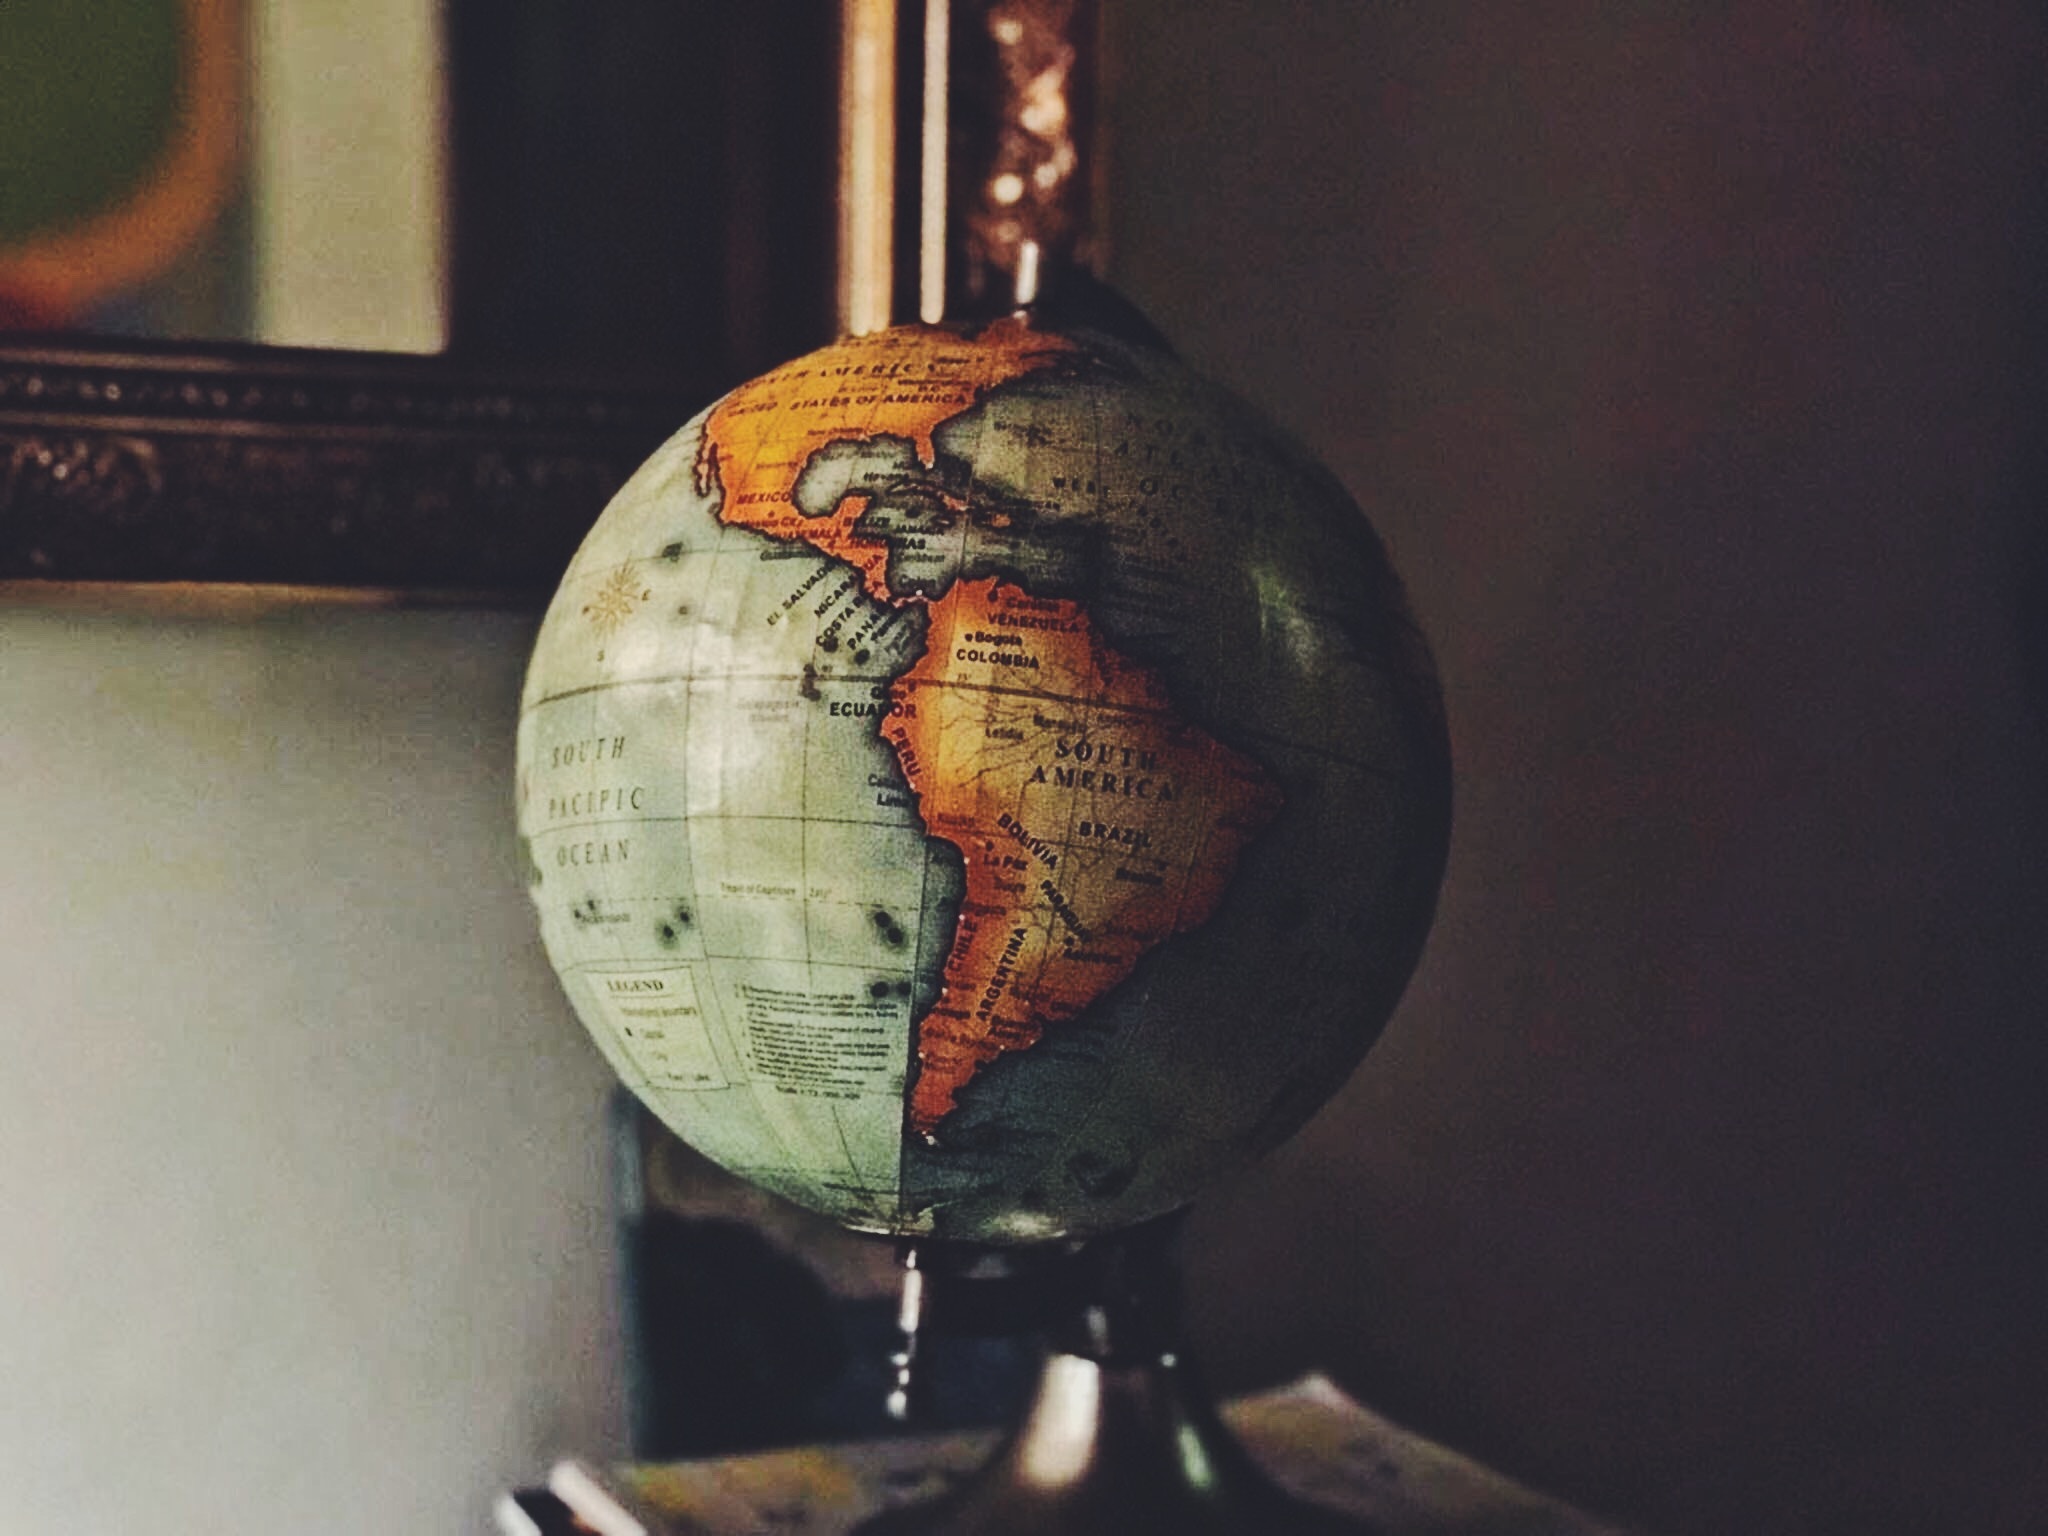 This globe contains all the Best countries for senior citizens